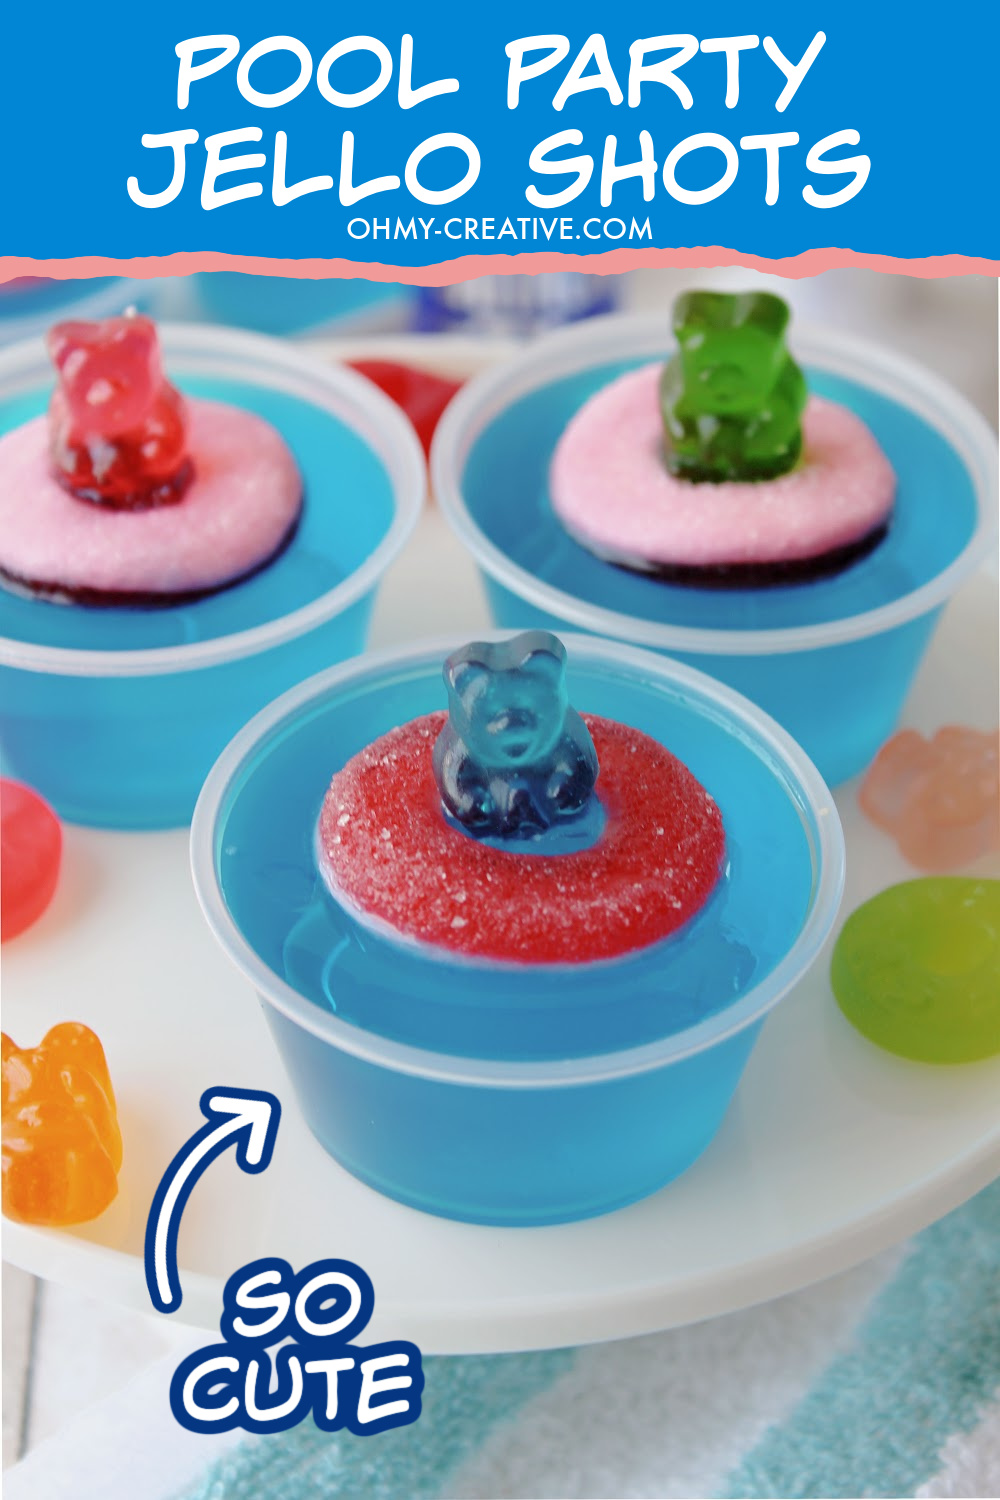 Blue jello shots made with gummy pool floats and gummy bears.